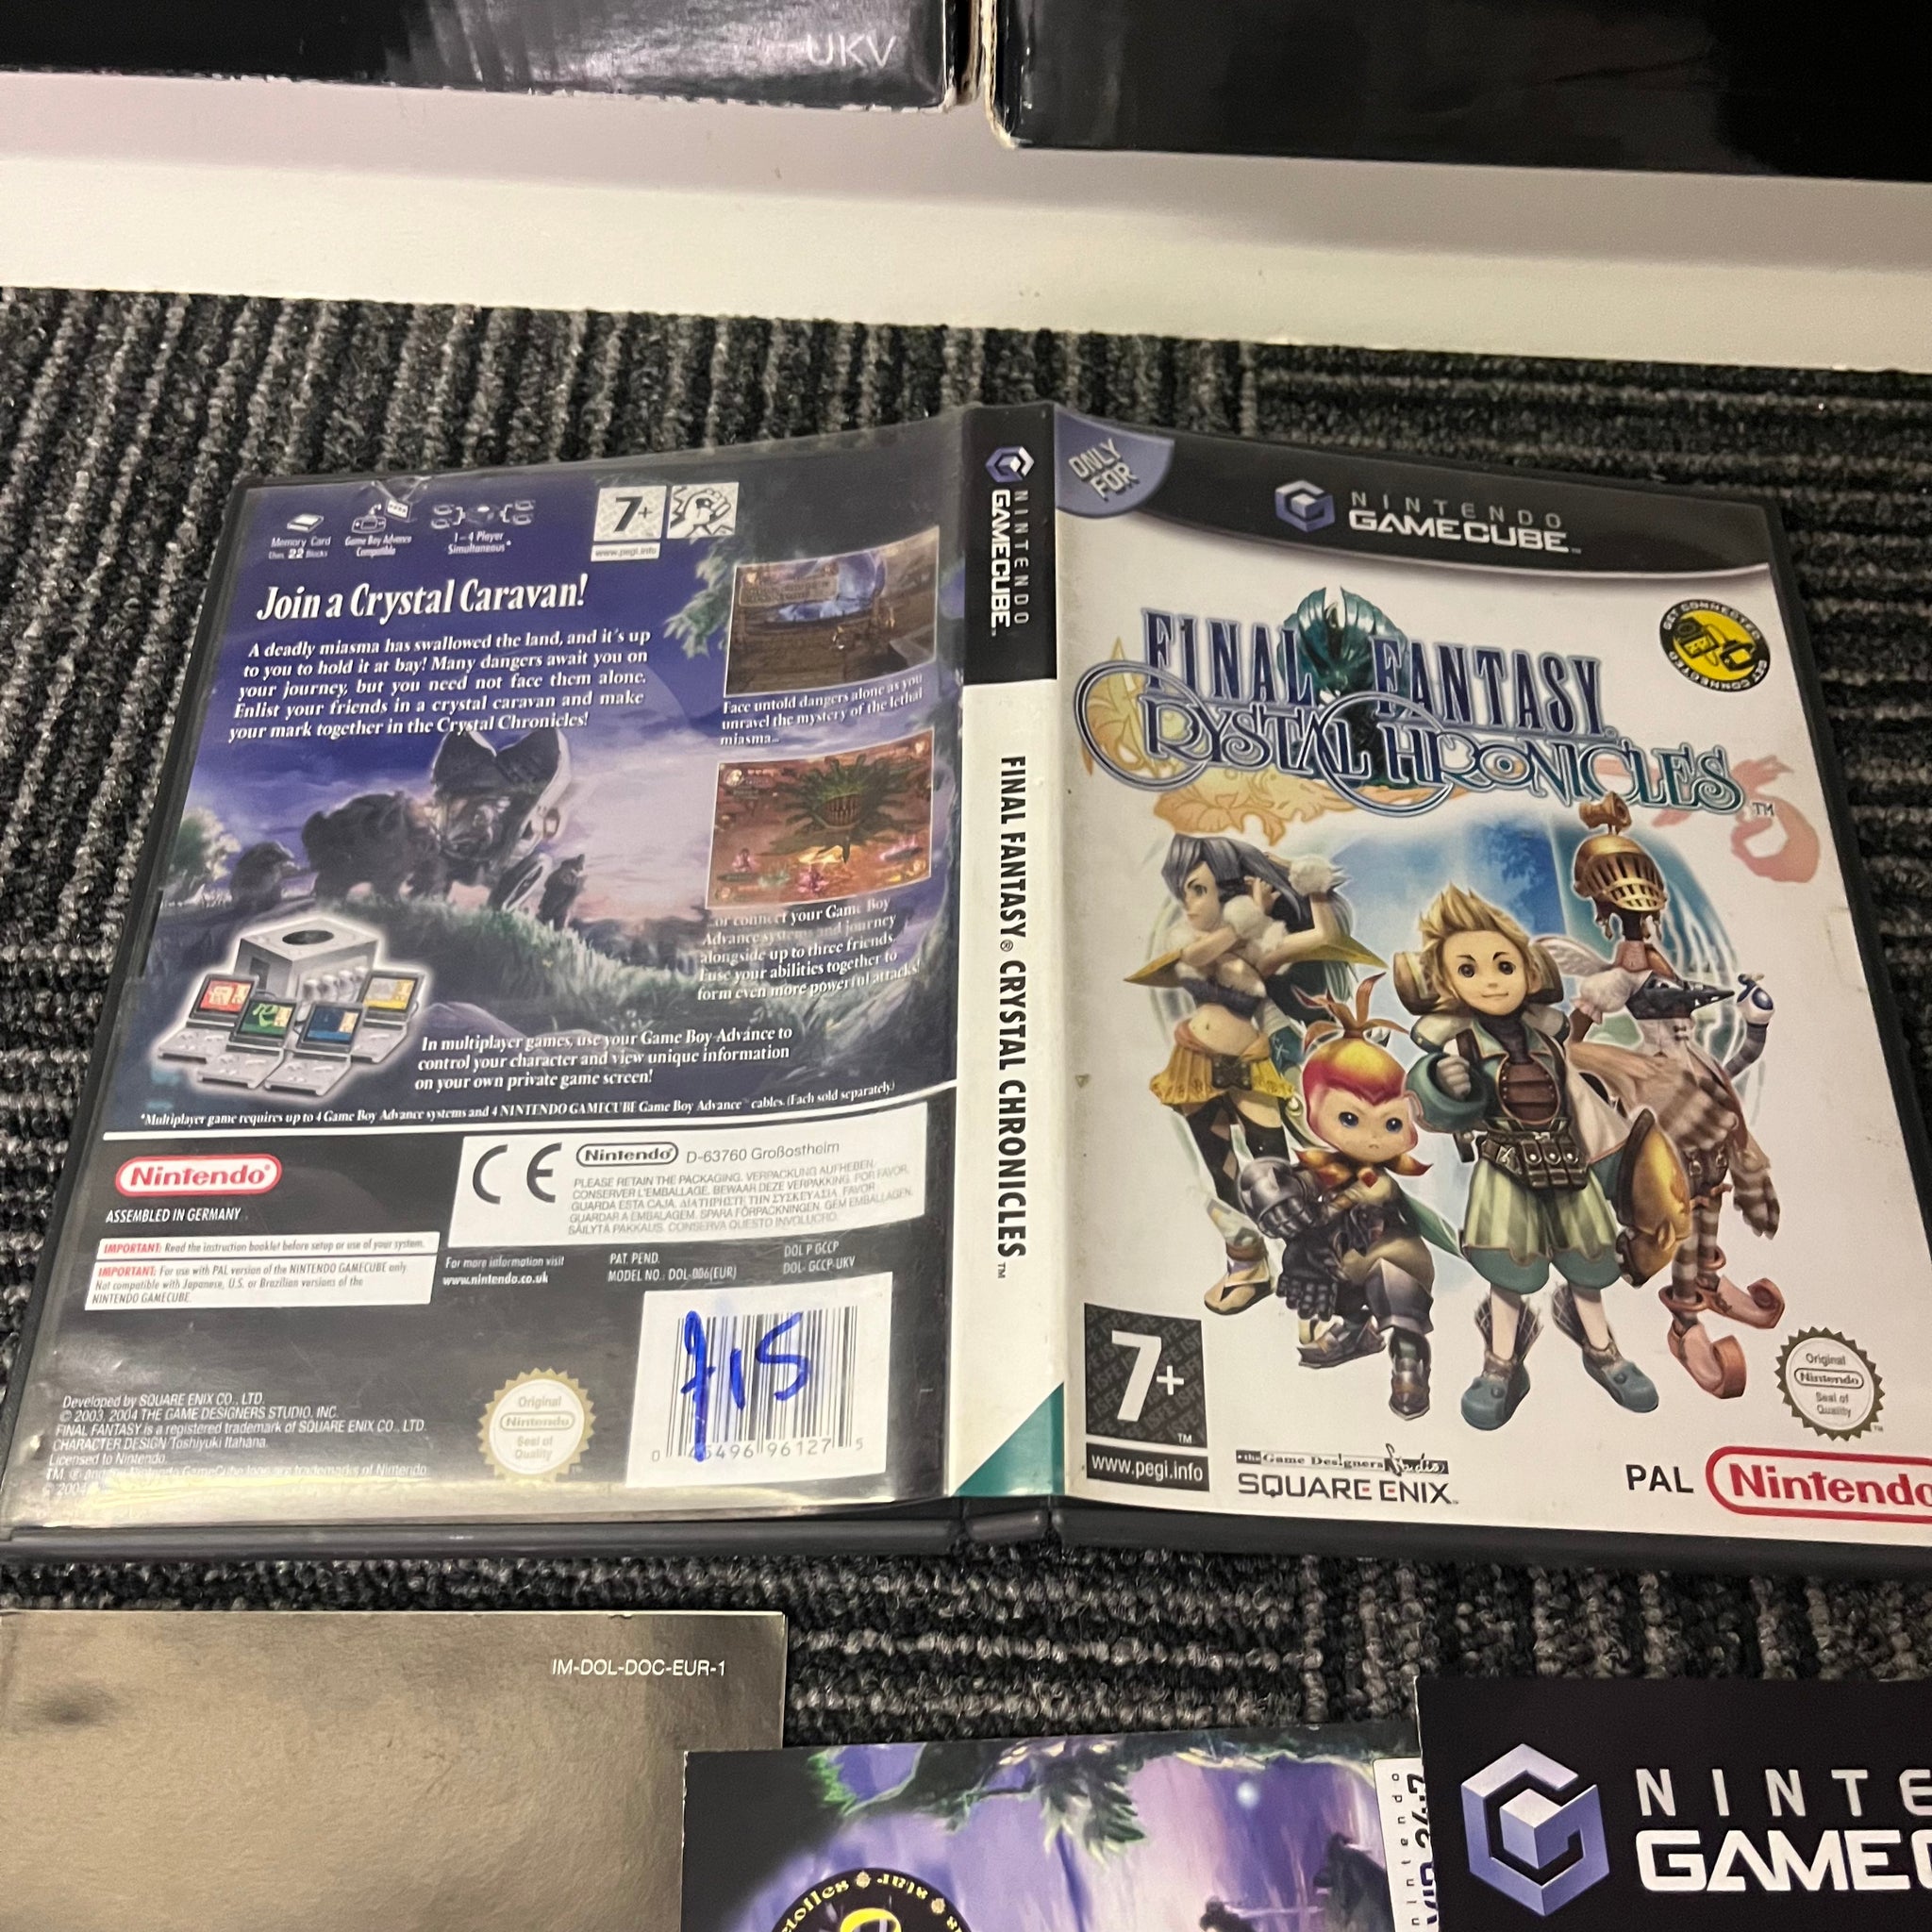 Final Fantasy: Crystal Chronicles Nintendo GameCube game complete